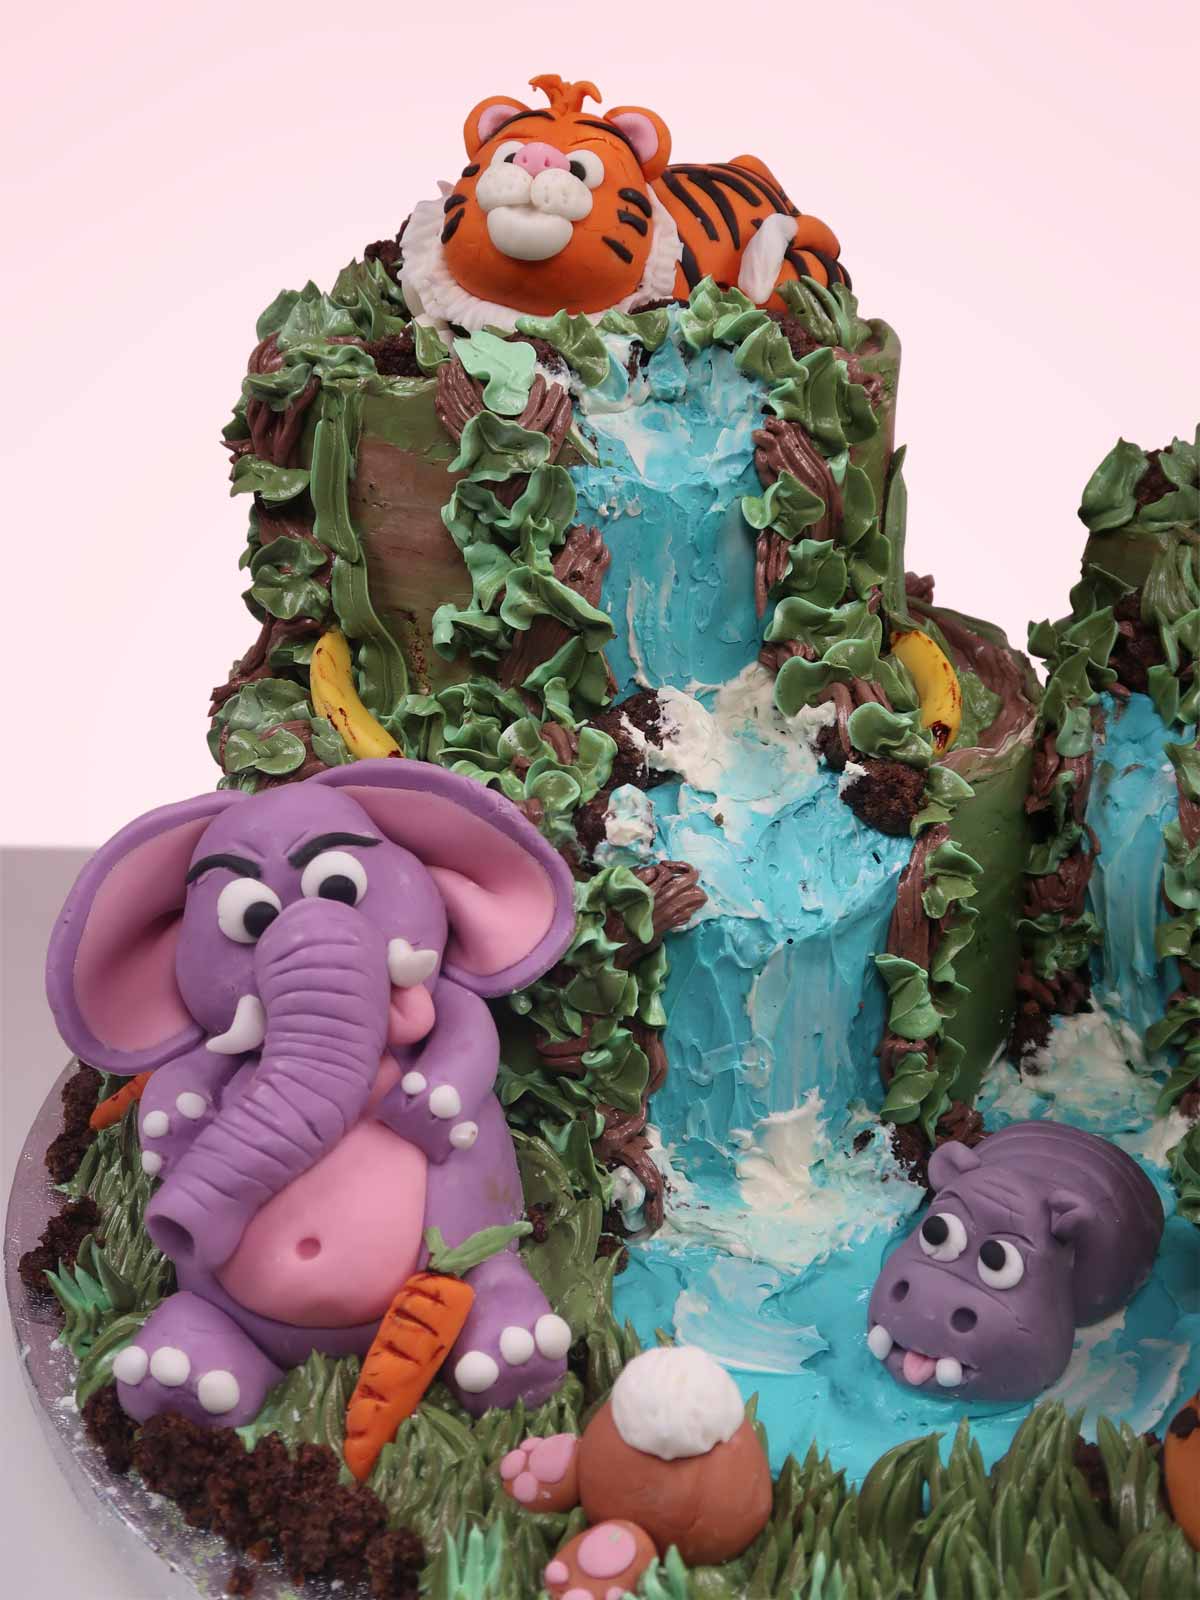 Jungle Animal Cakescape Cake to Buy